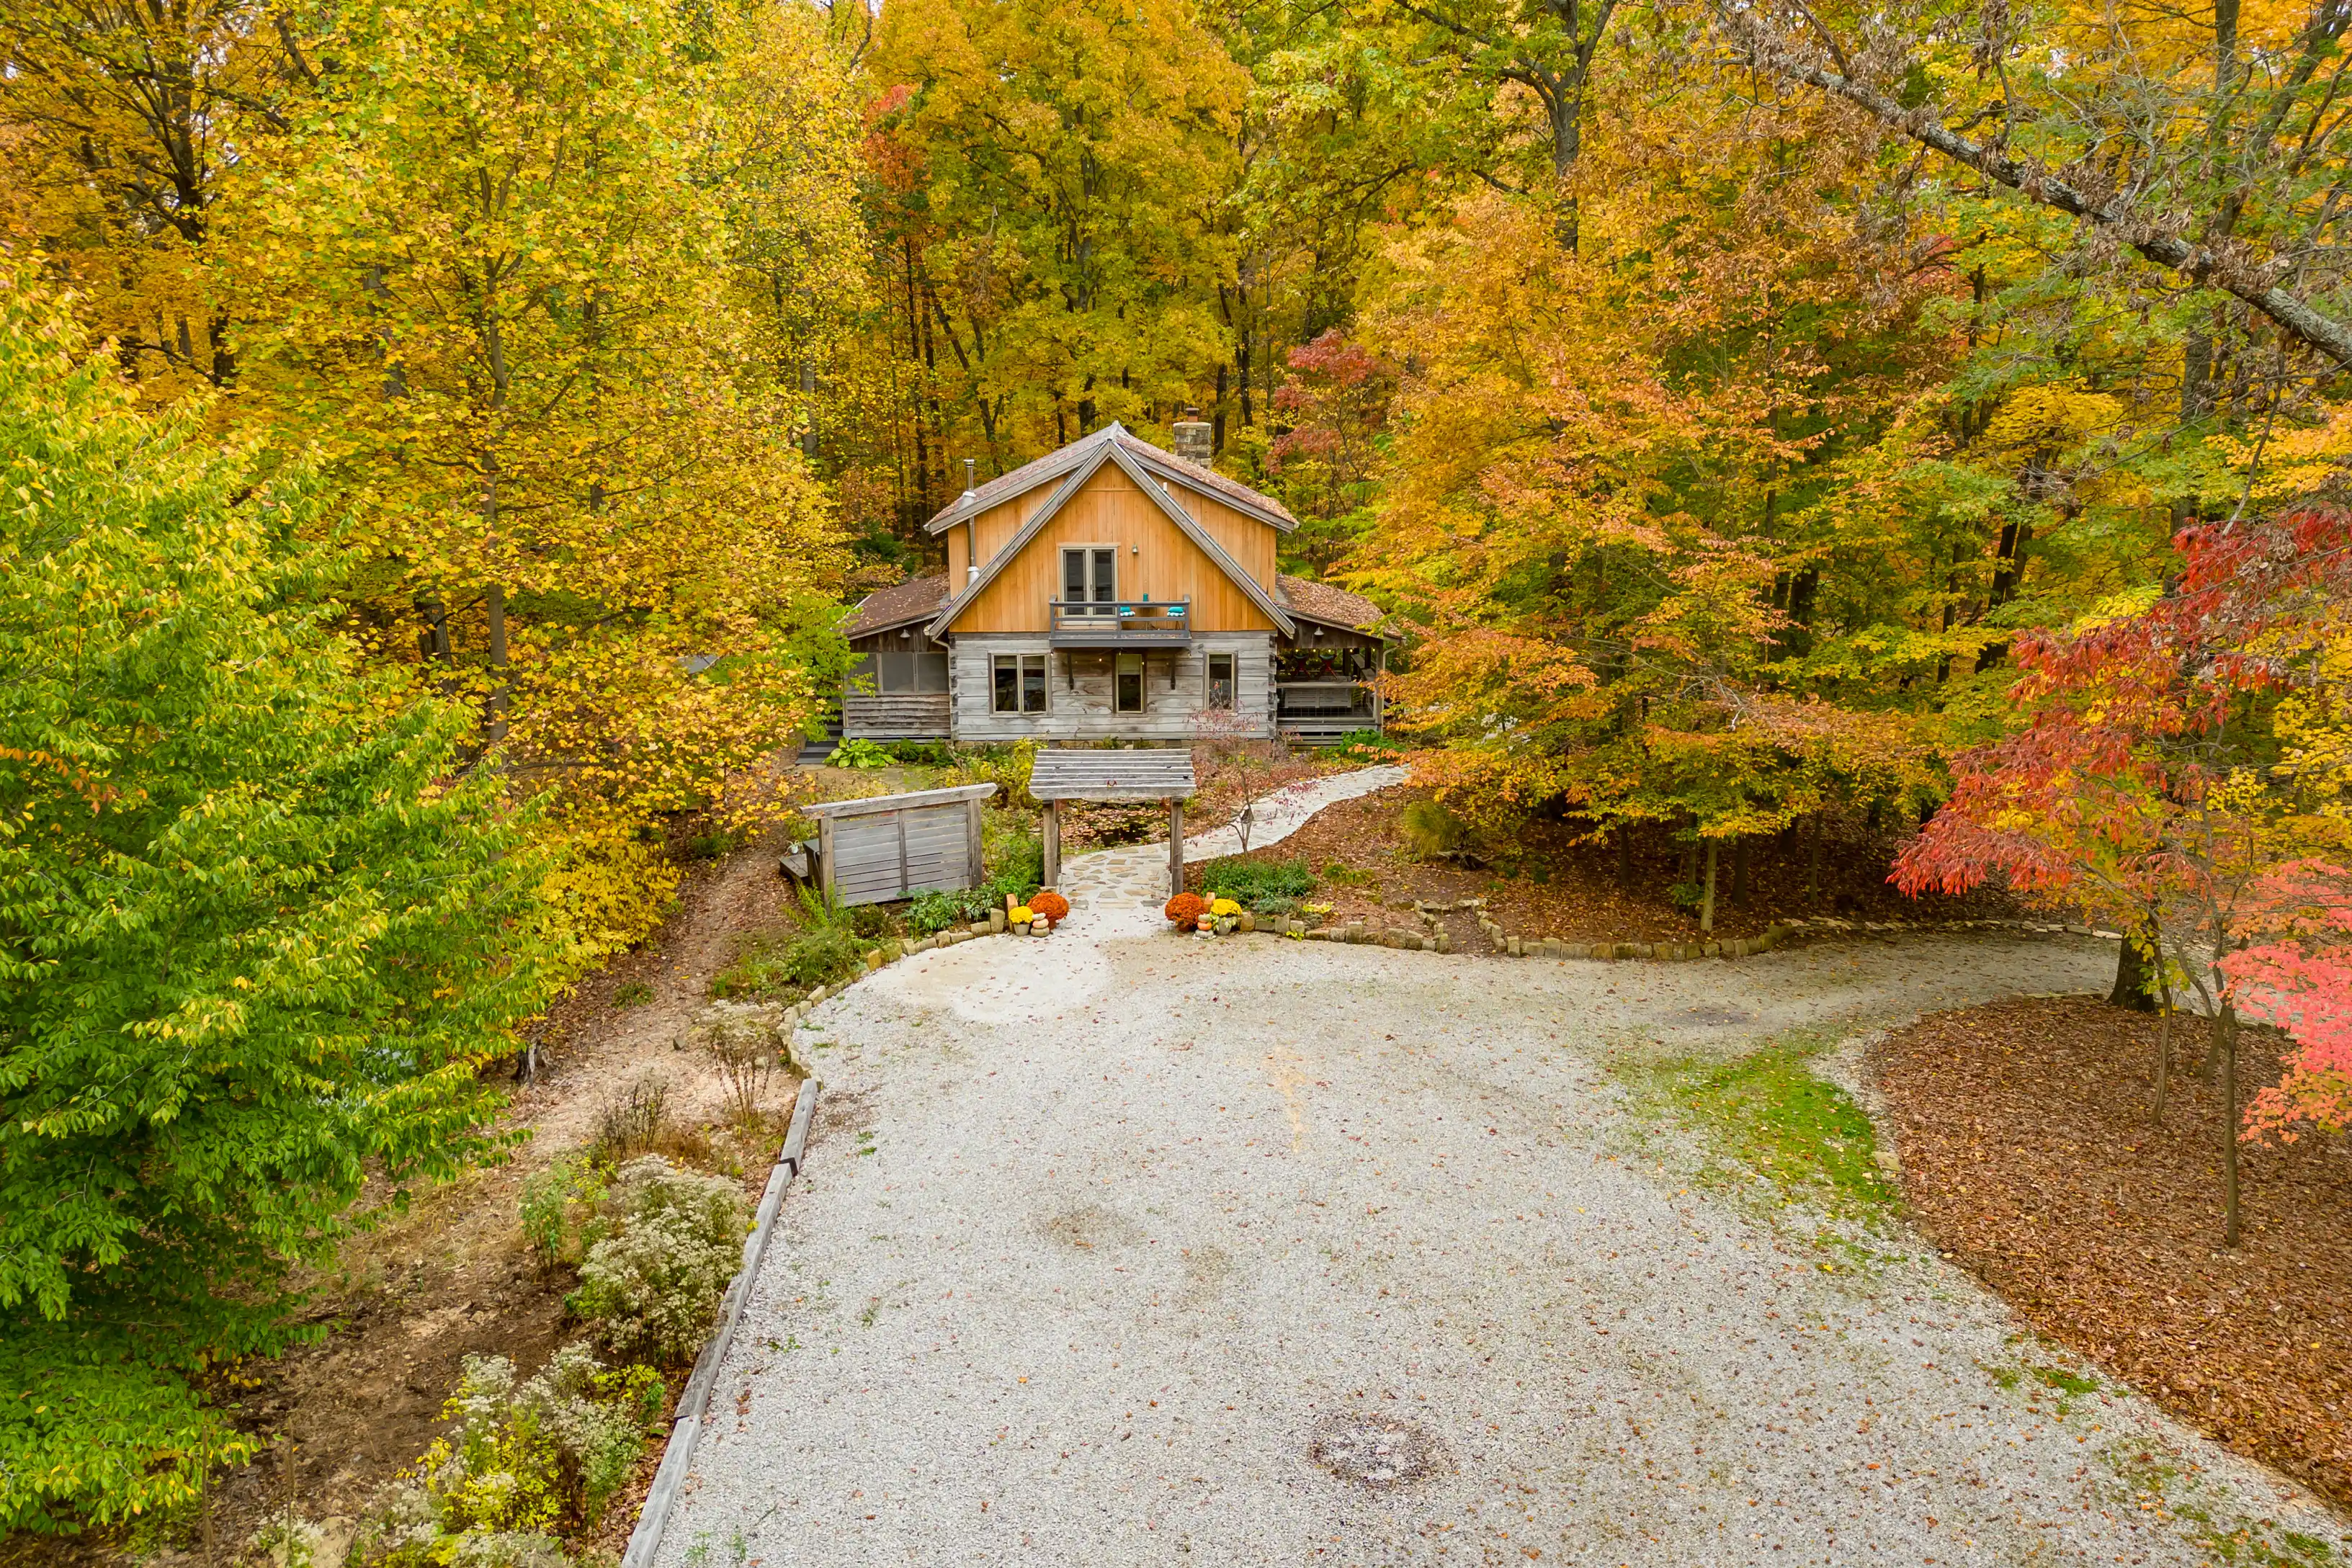 Cozy wooden cabin surrounded by a colorful autumn forest with a gravel driveway and pumpkins near the entrance.